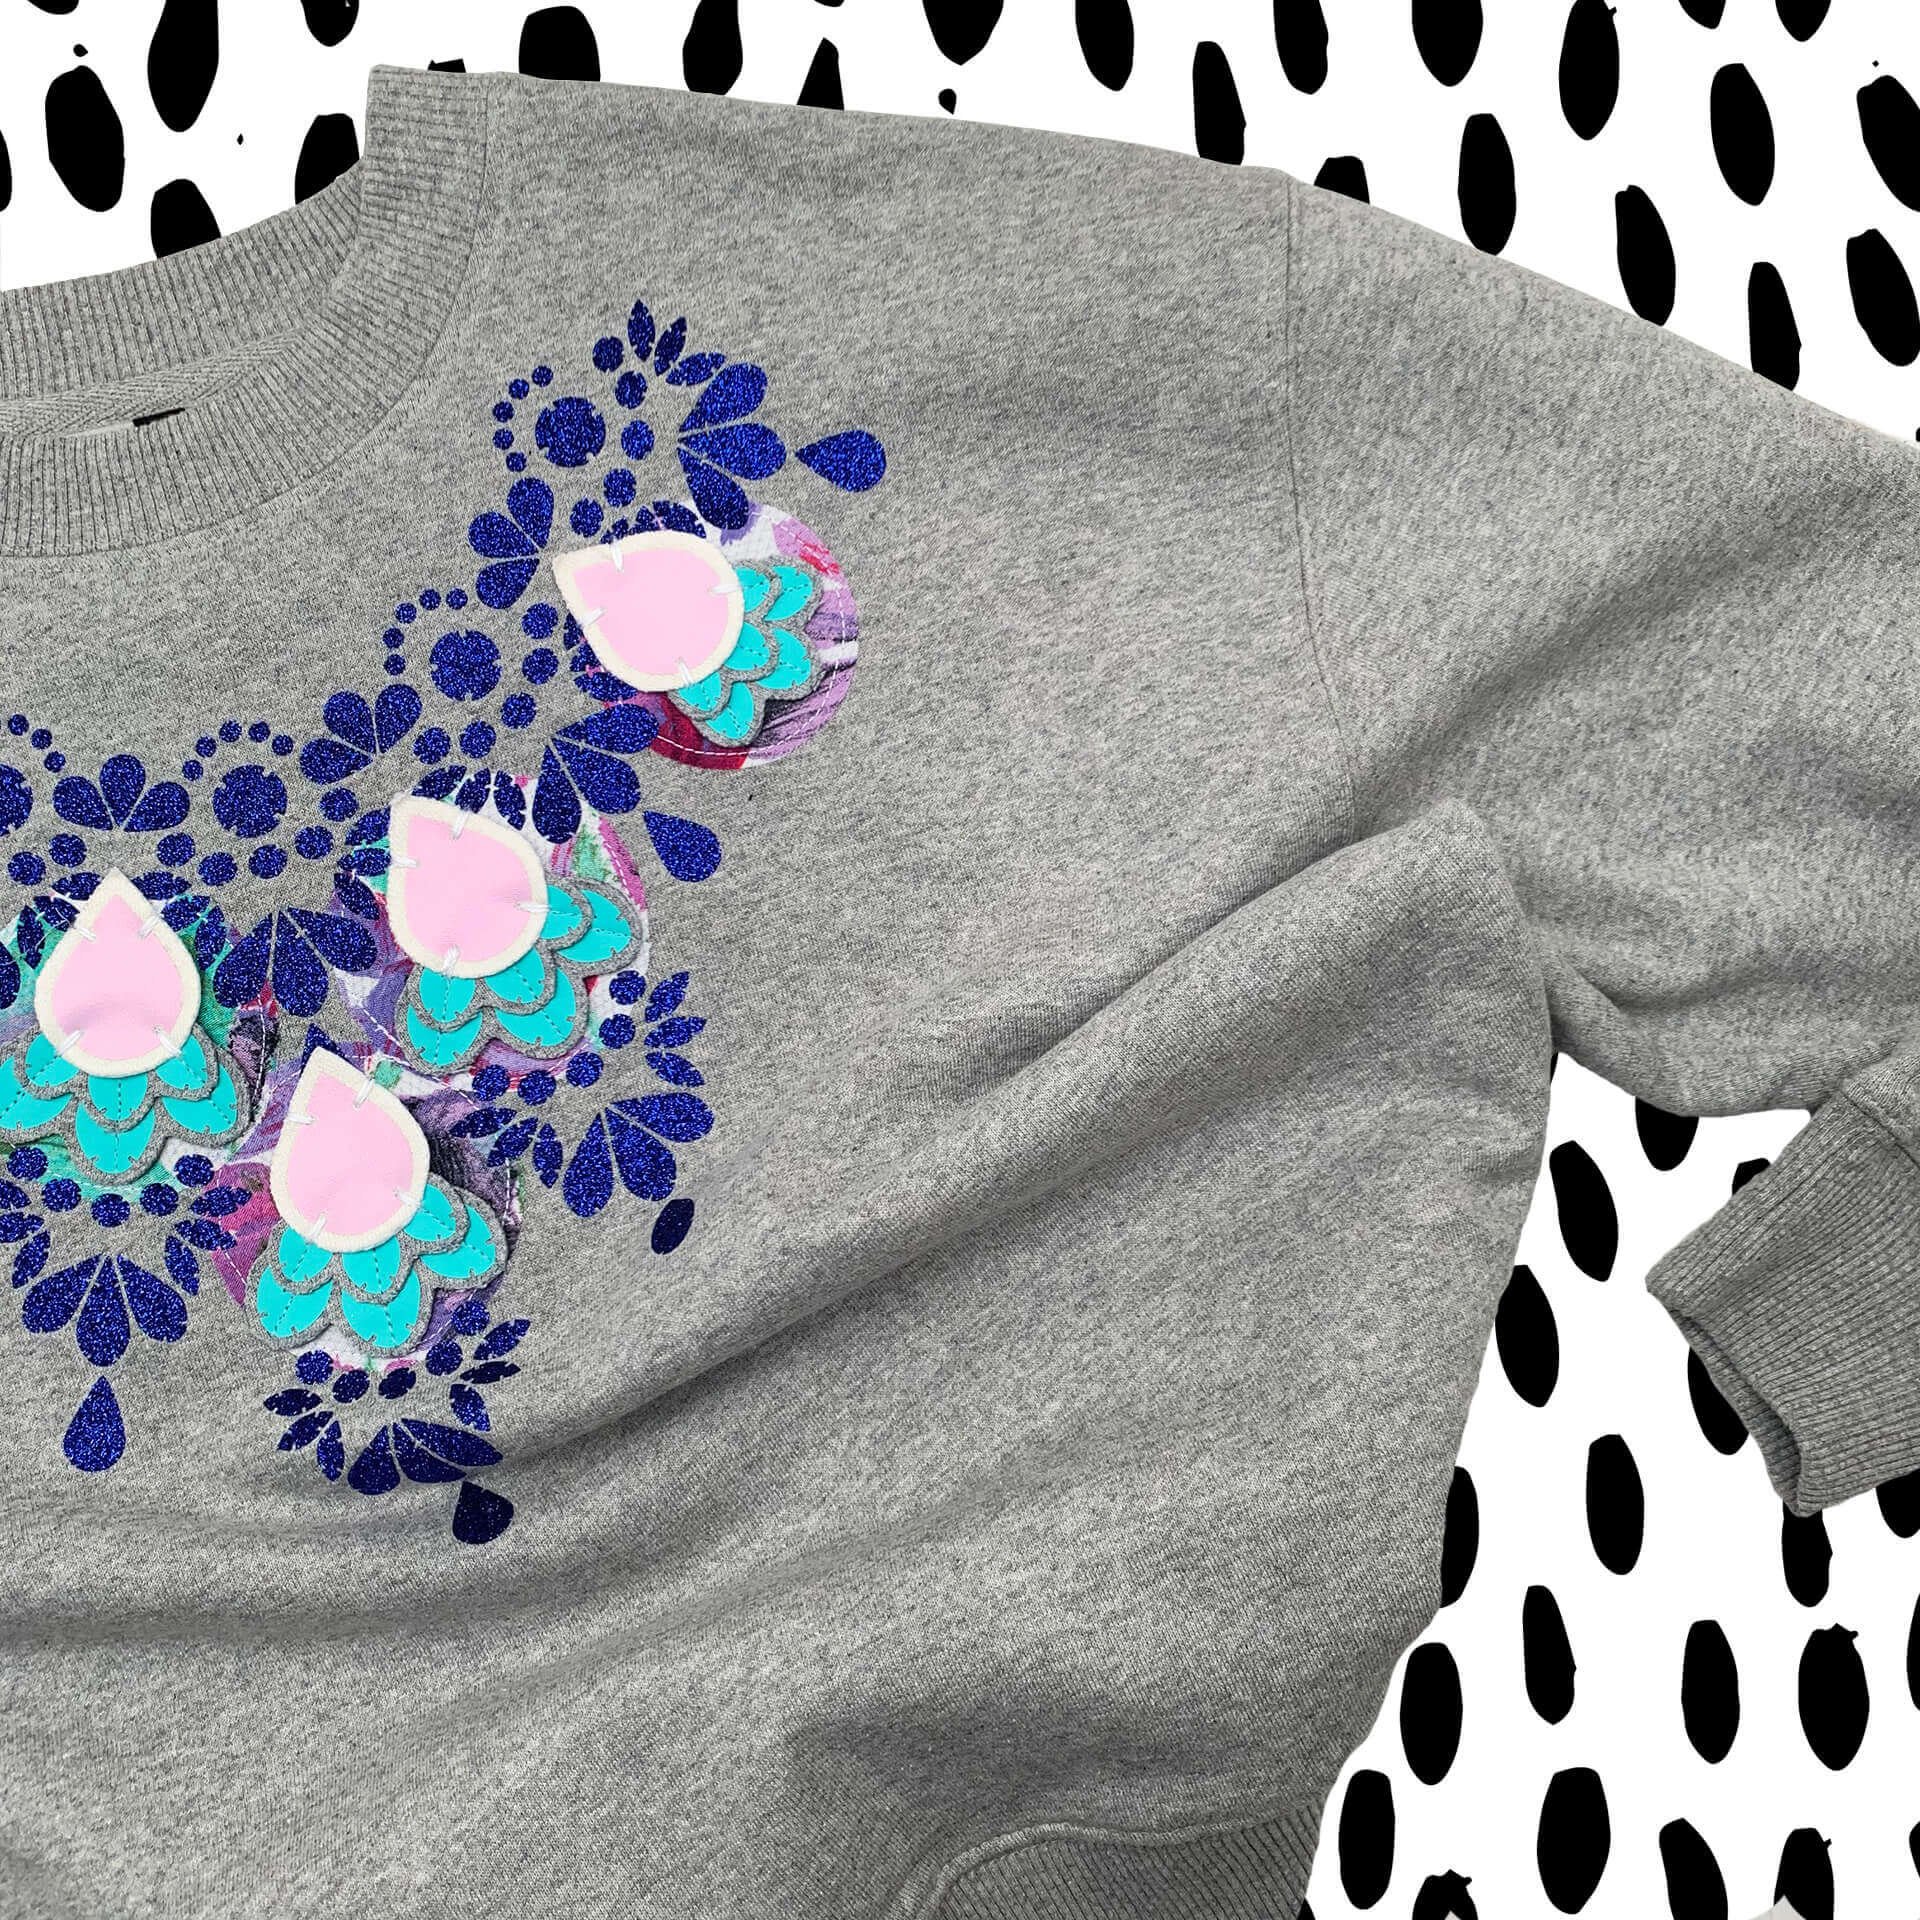 An embellished sweatshirt in grey, glittery blue, turquoise and pale pink laid out against a black and white patterned background. Only the right hand side of the garment is in shot. The grarment is a grey marl dropped shoulder sweatshirt.